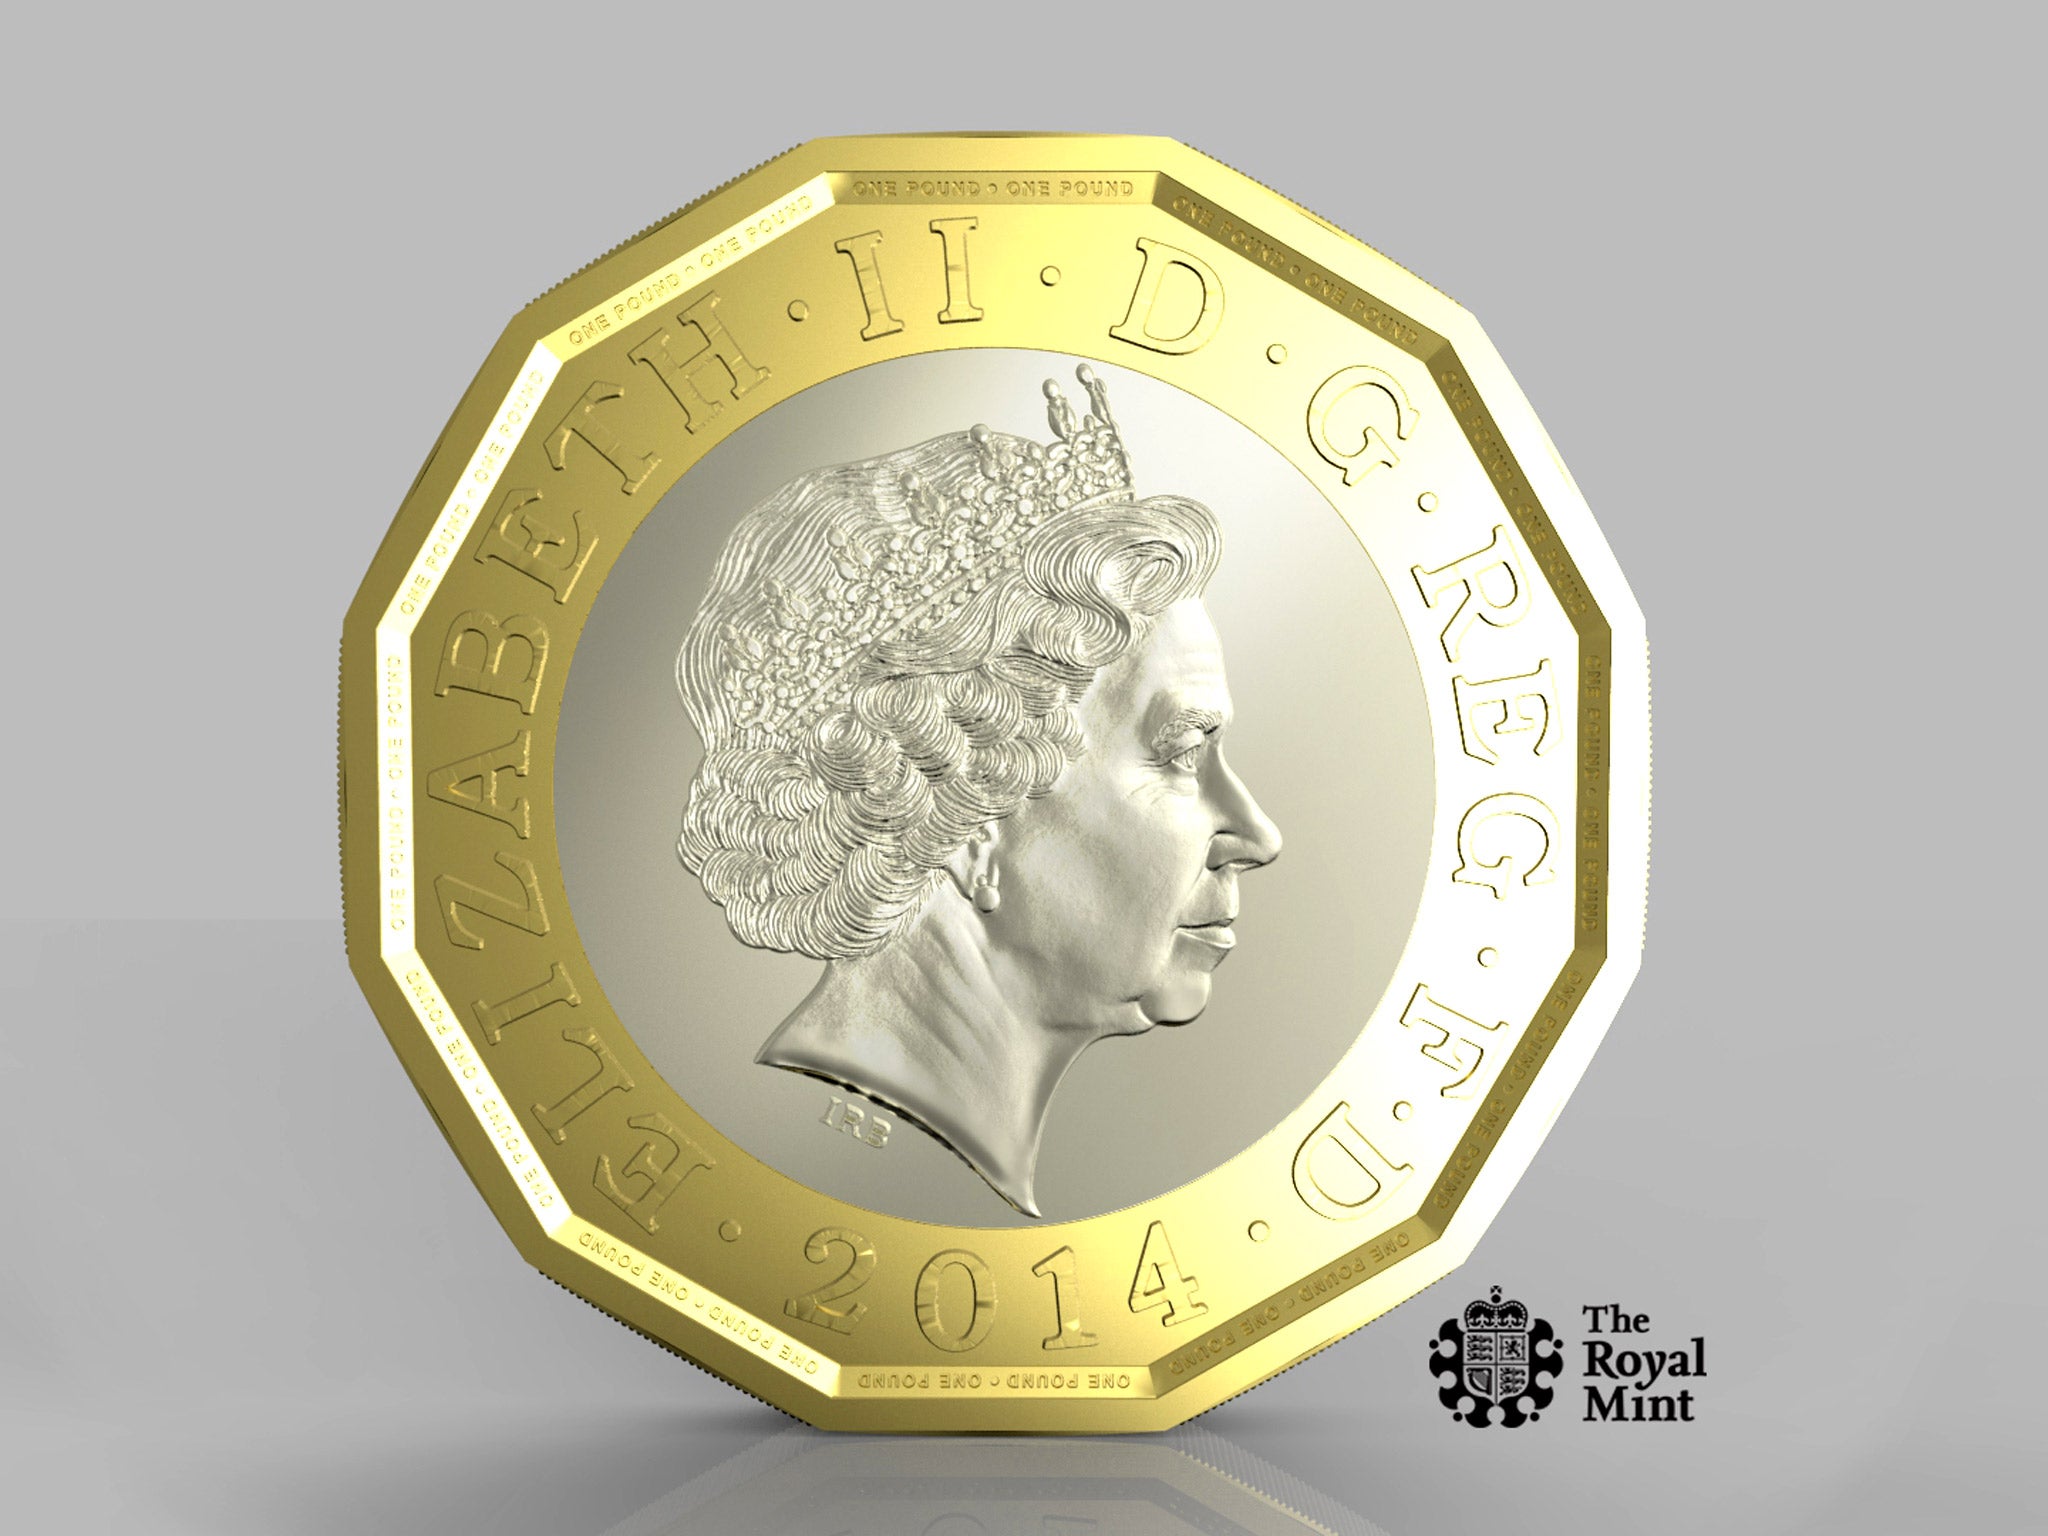 The new pound coin will be composed of two metals